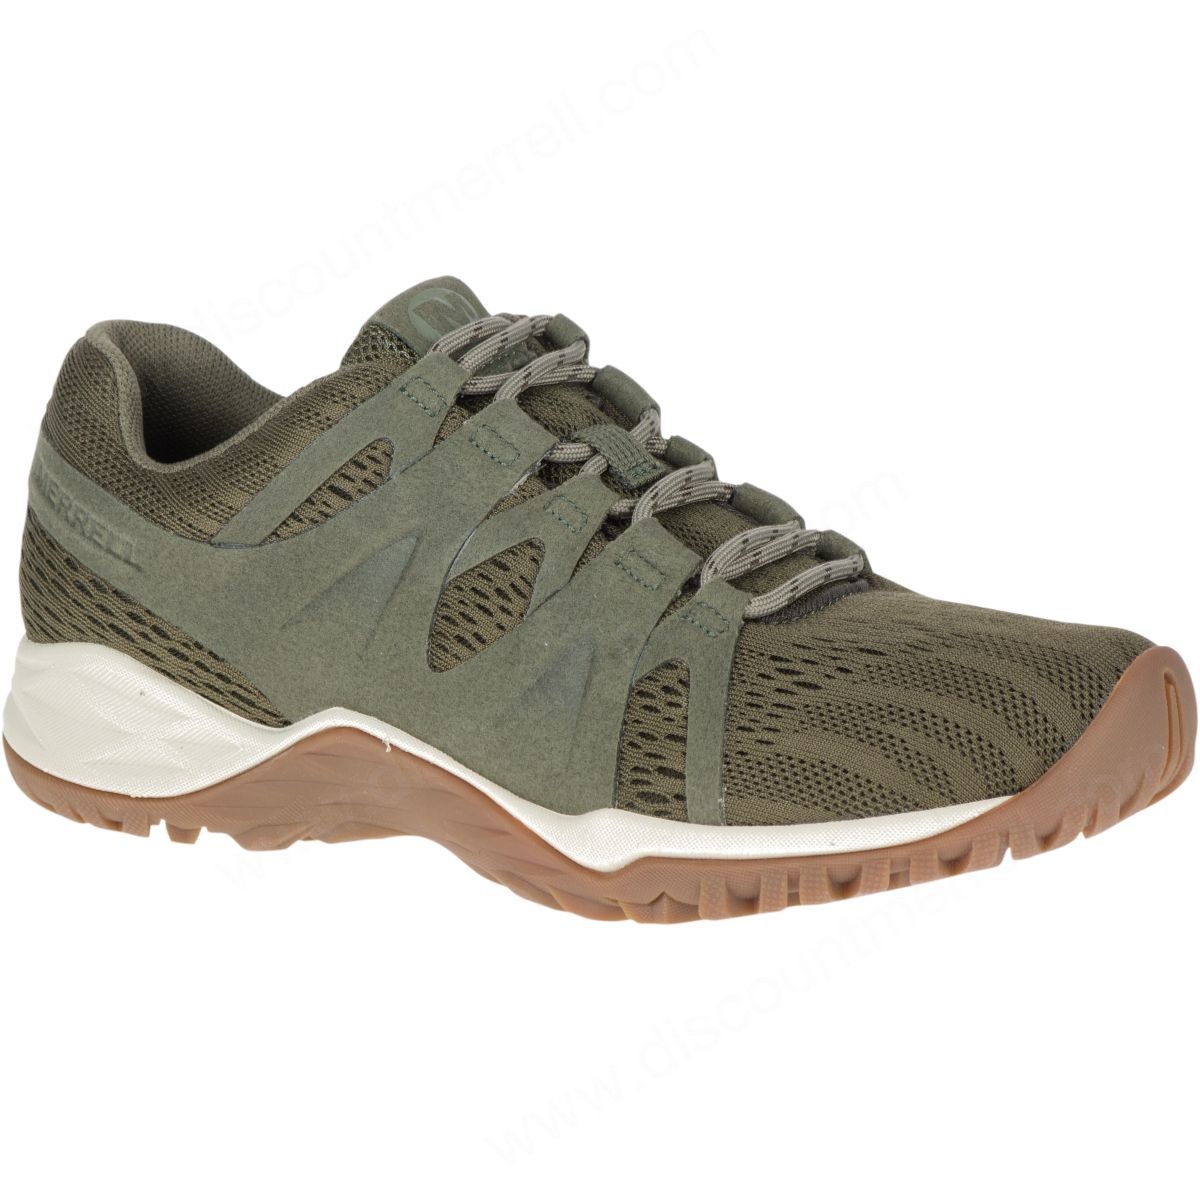 Merrell Lady's Siren Guided Lace Q2 Dusty Olive - -0